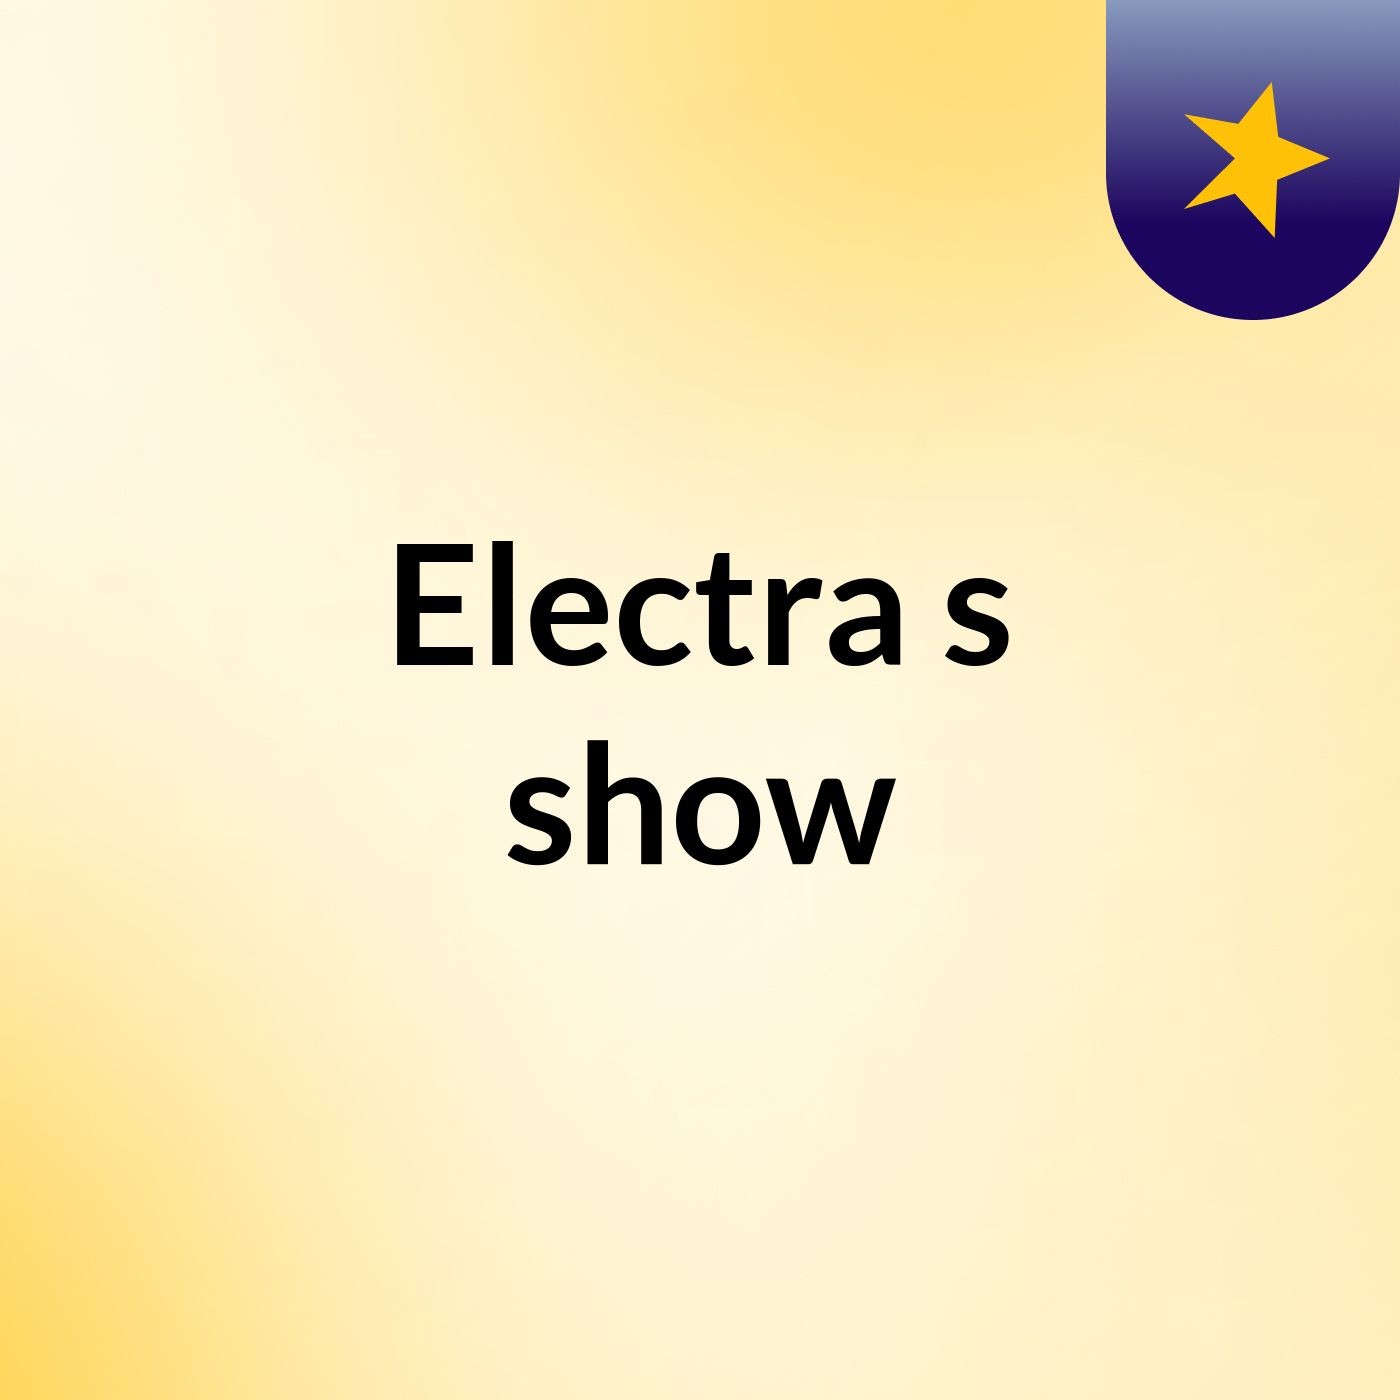 Electra's show